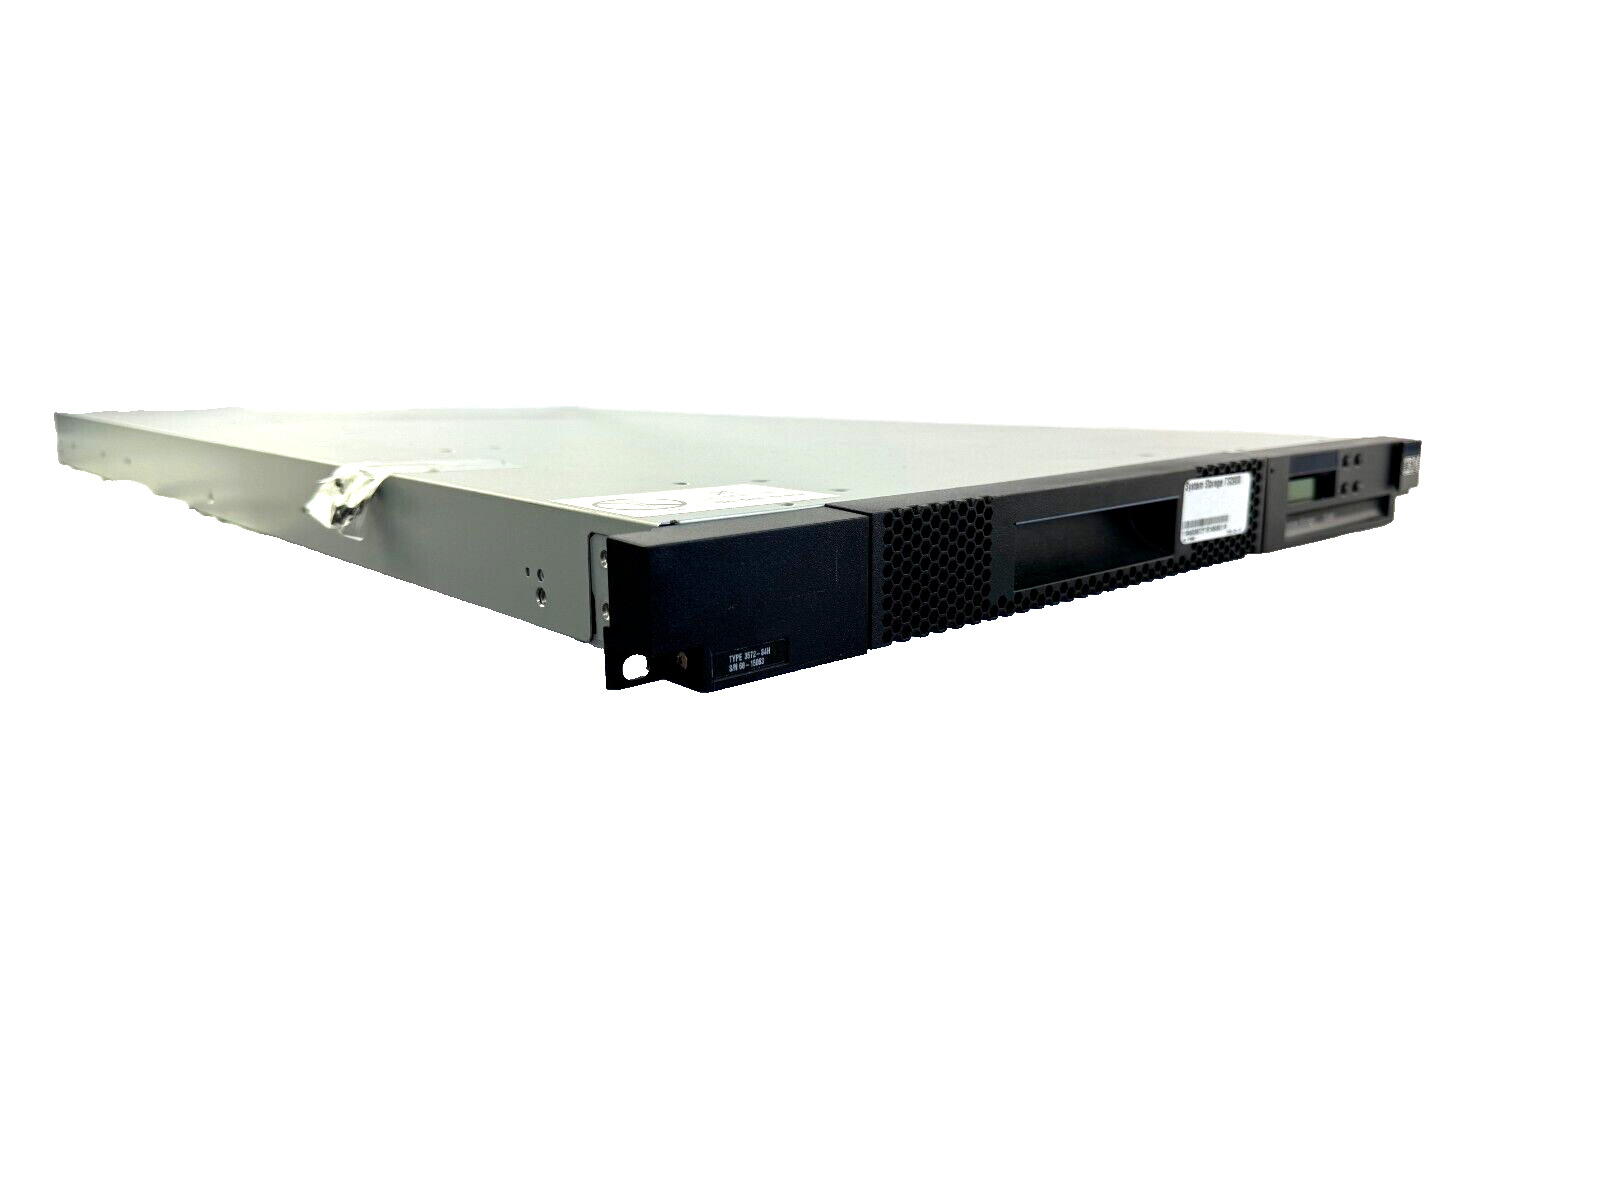 IBM TS2900 System Storage 3572-S4H  LTO-4 Tape Autoloader Library